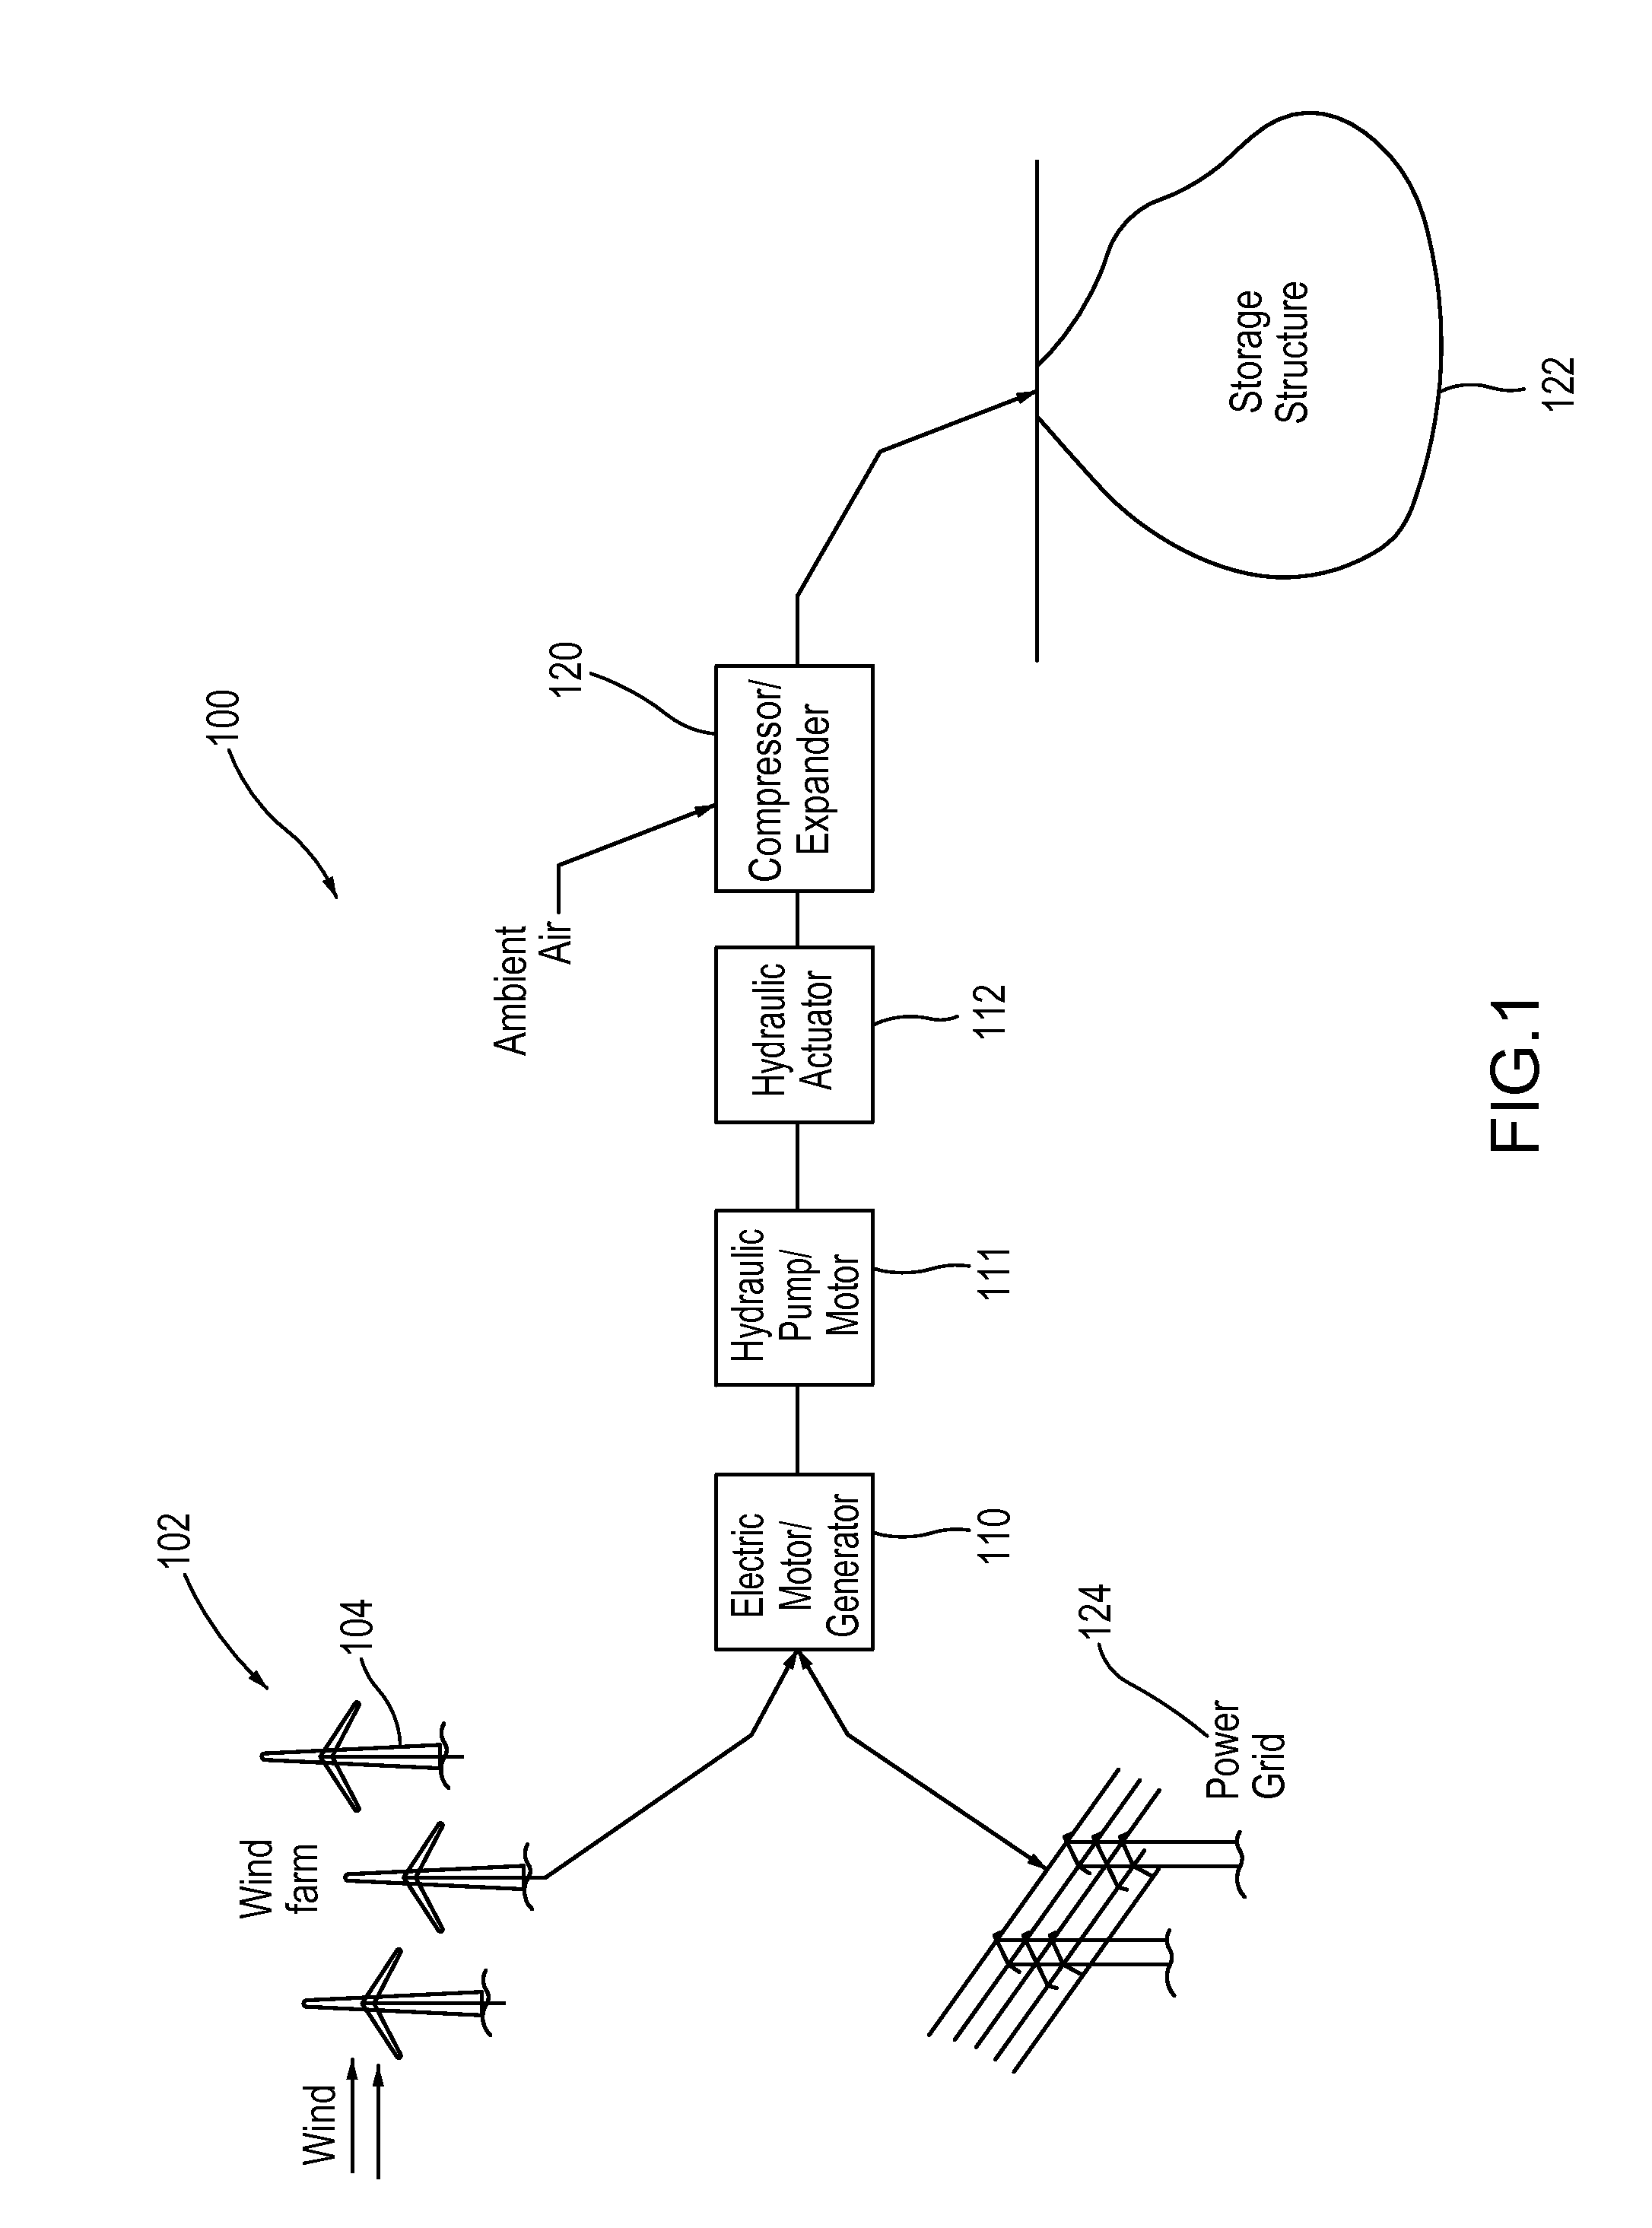 System and methods for optimizing efficiency of a hydraulically actuated system